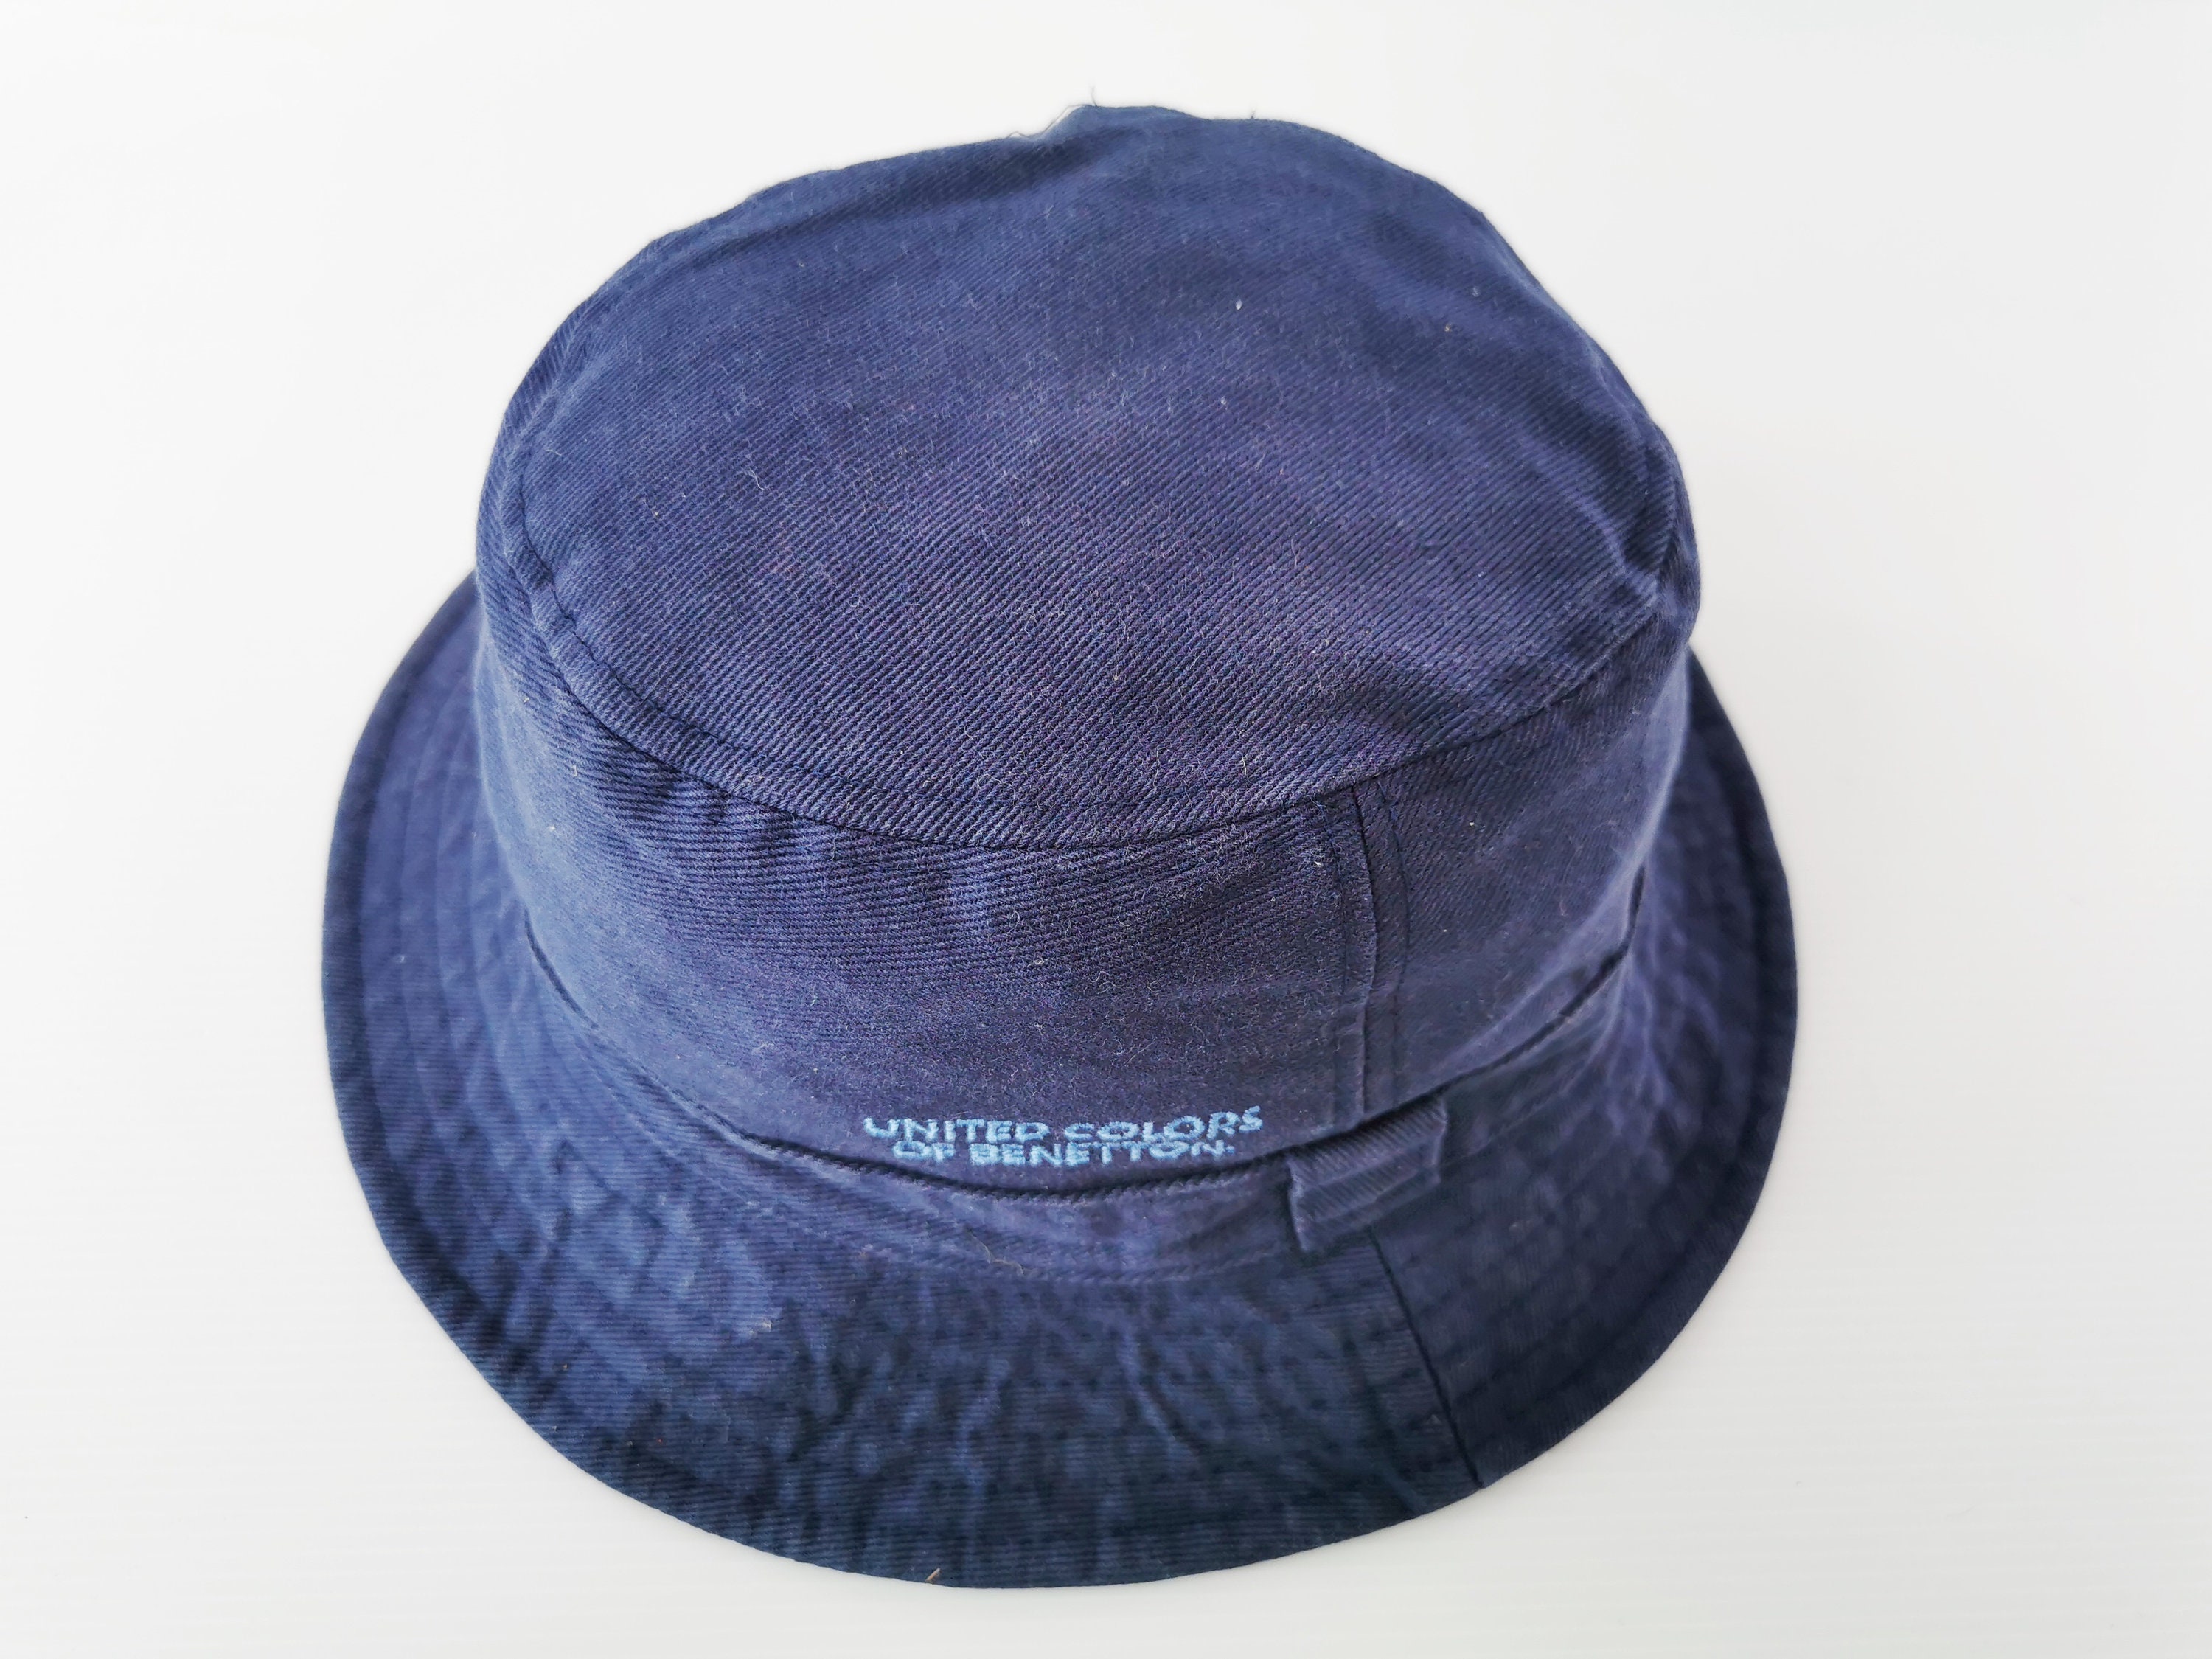 United Colors of Benetton Hat Vintage United Colors of Benetton Made in Japan Bucket Hat Cap